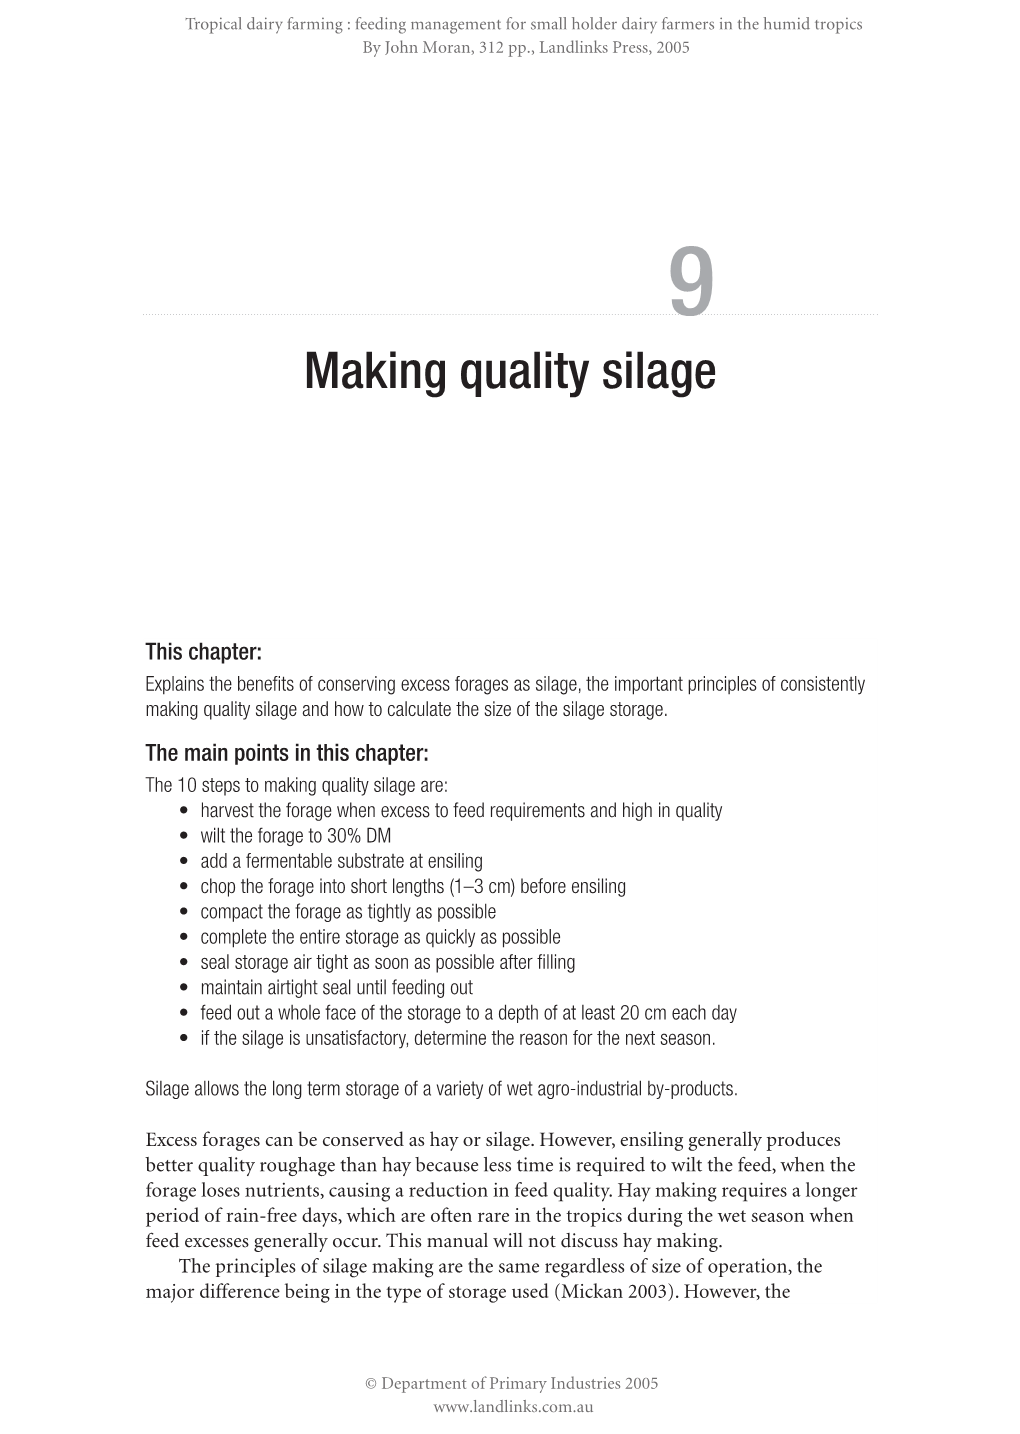 Making Quality Silage